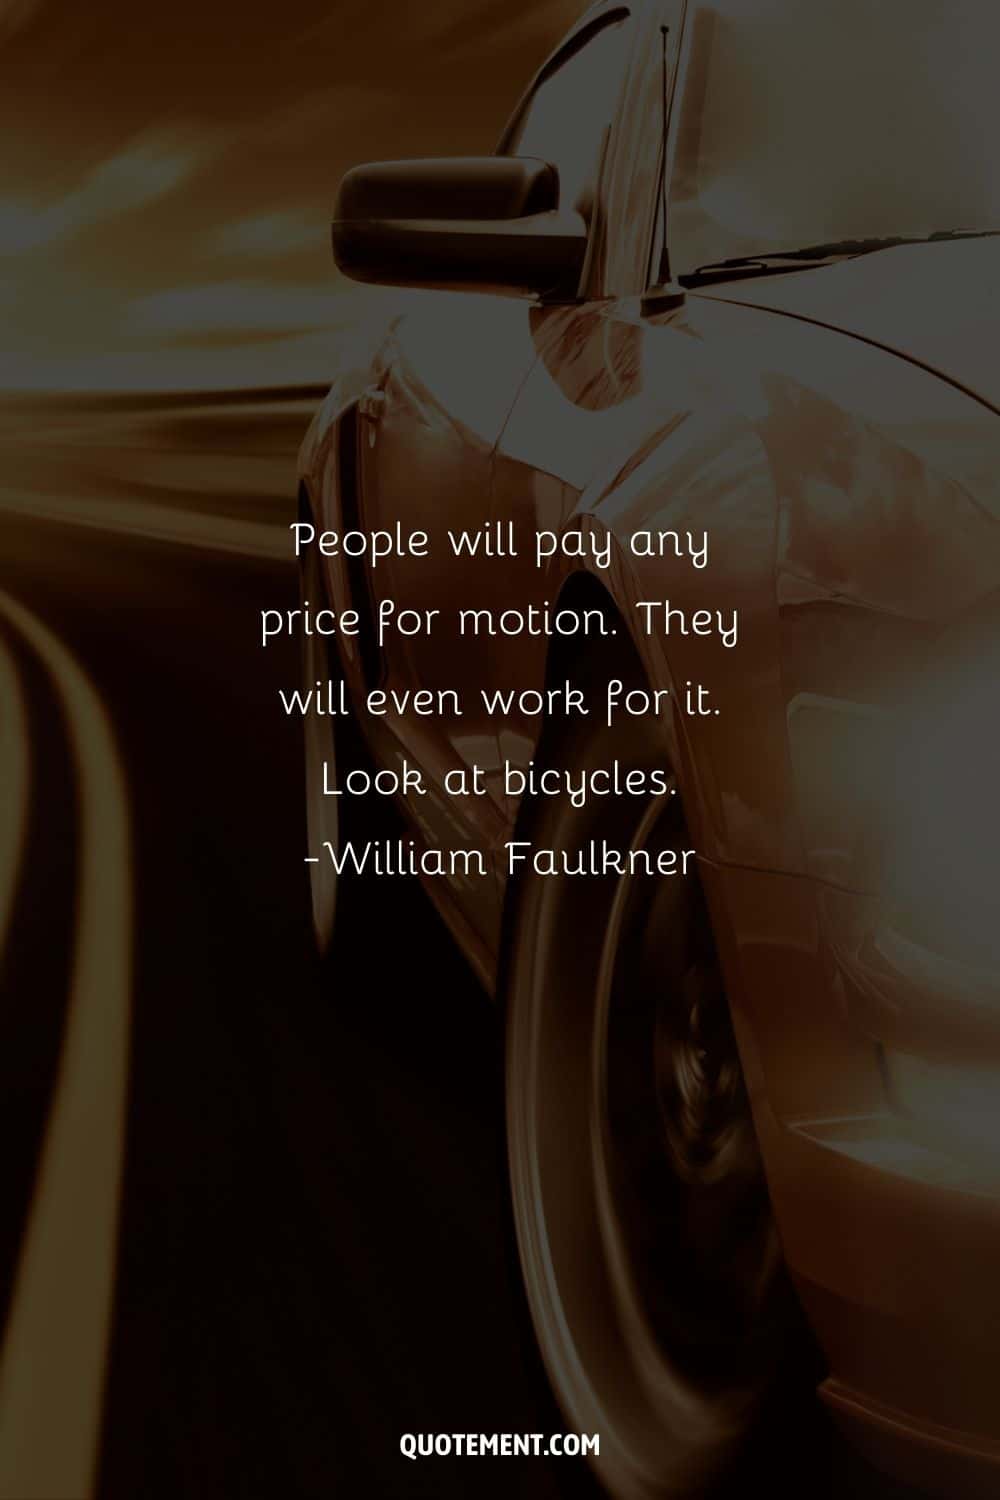 “People will pay any price for motion. They will even work for it. Look at bicycles.”― William Faulkner, The Reivers